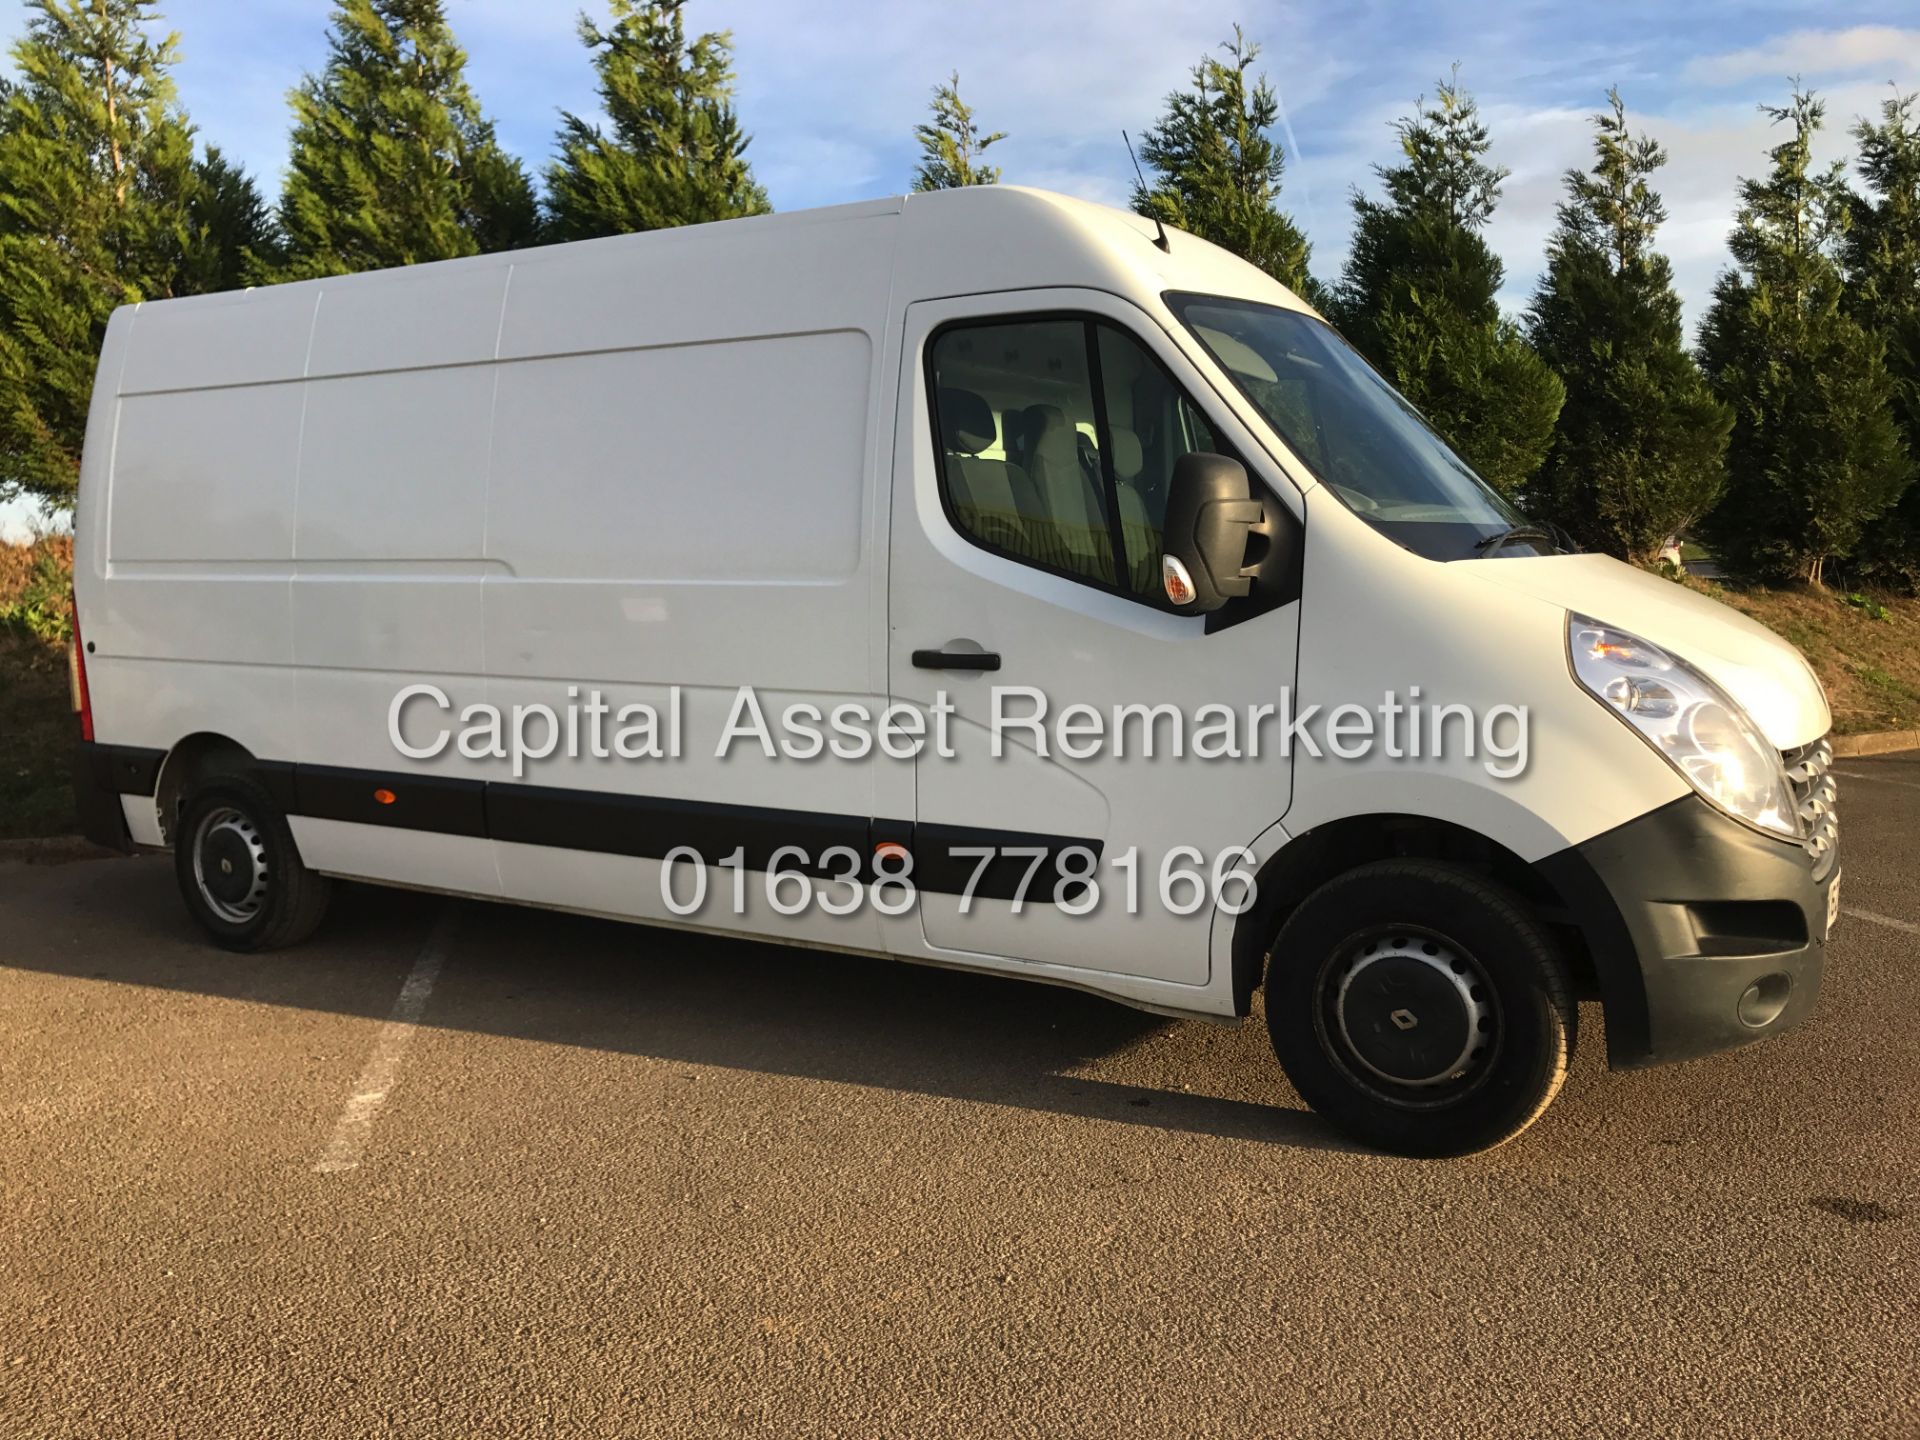 On Sale RENAULT MASTER LM35 2.3DCI LONG WHEEL BASE - 62 REG - NEW SHAPE - 1 OWNER - AIR CON -